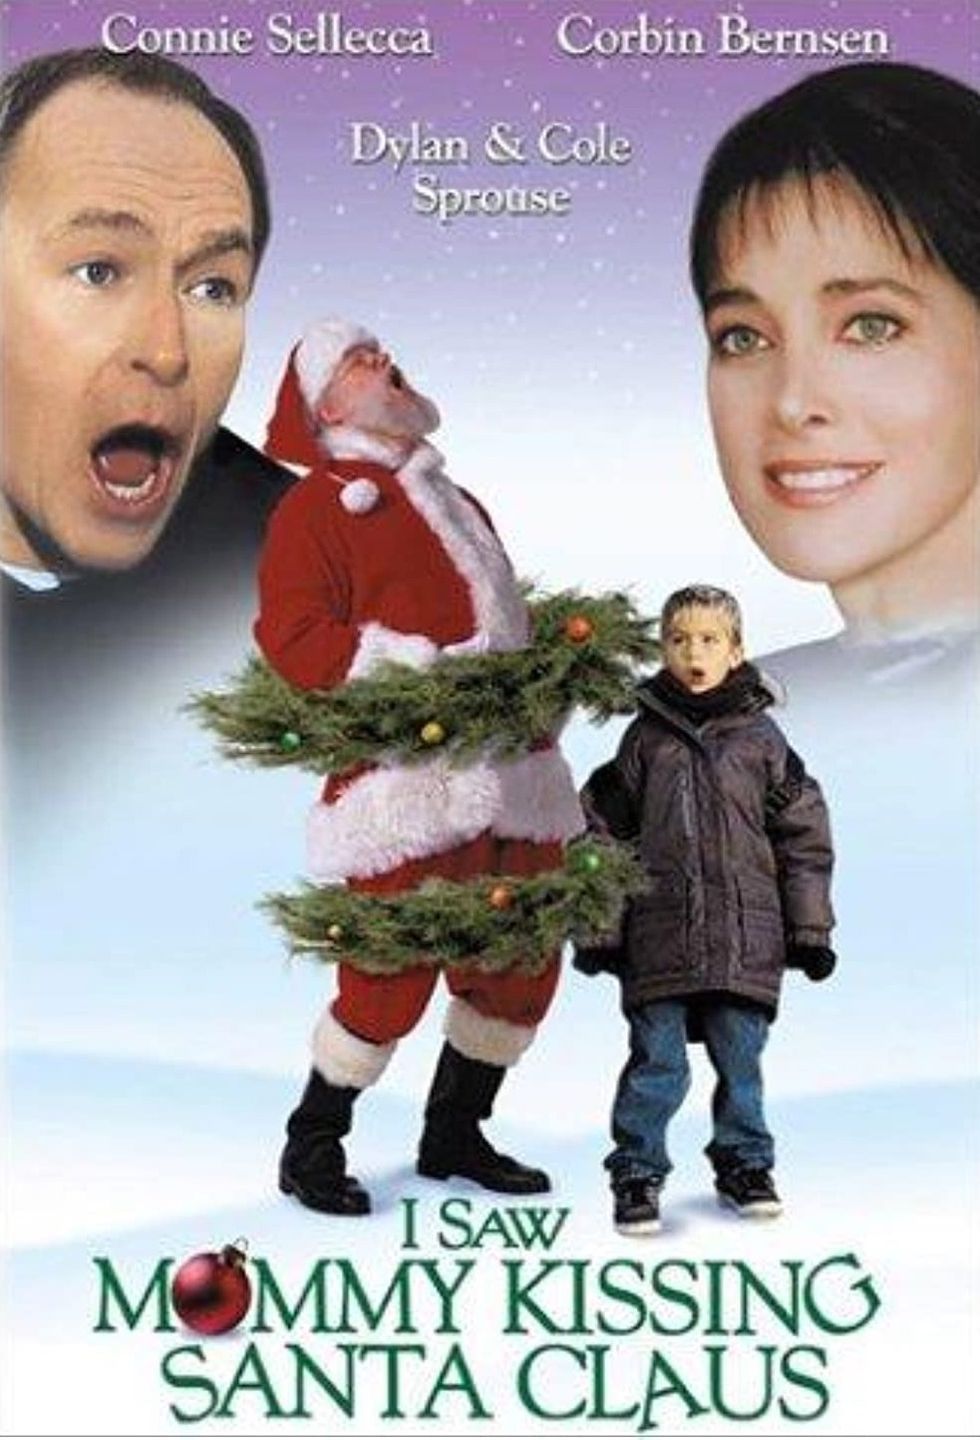 75 Best Christmas Movies Ever Made - Top Holiday Films List